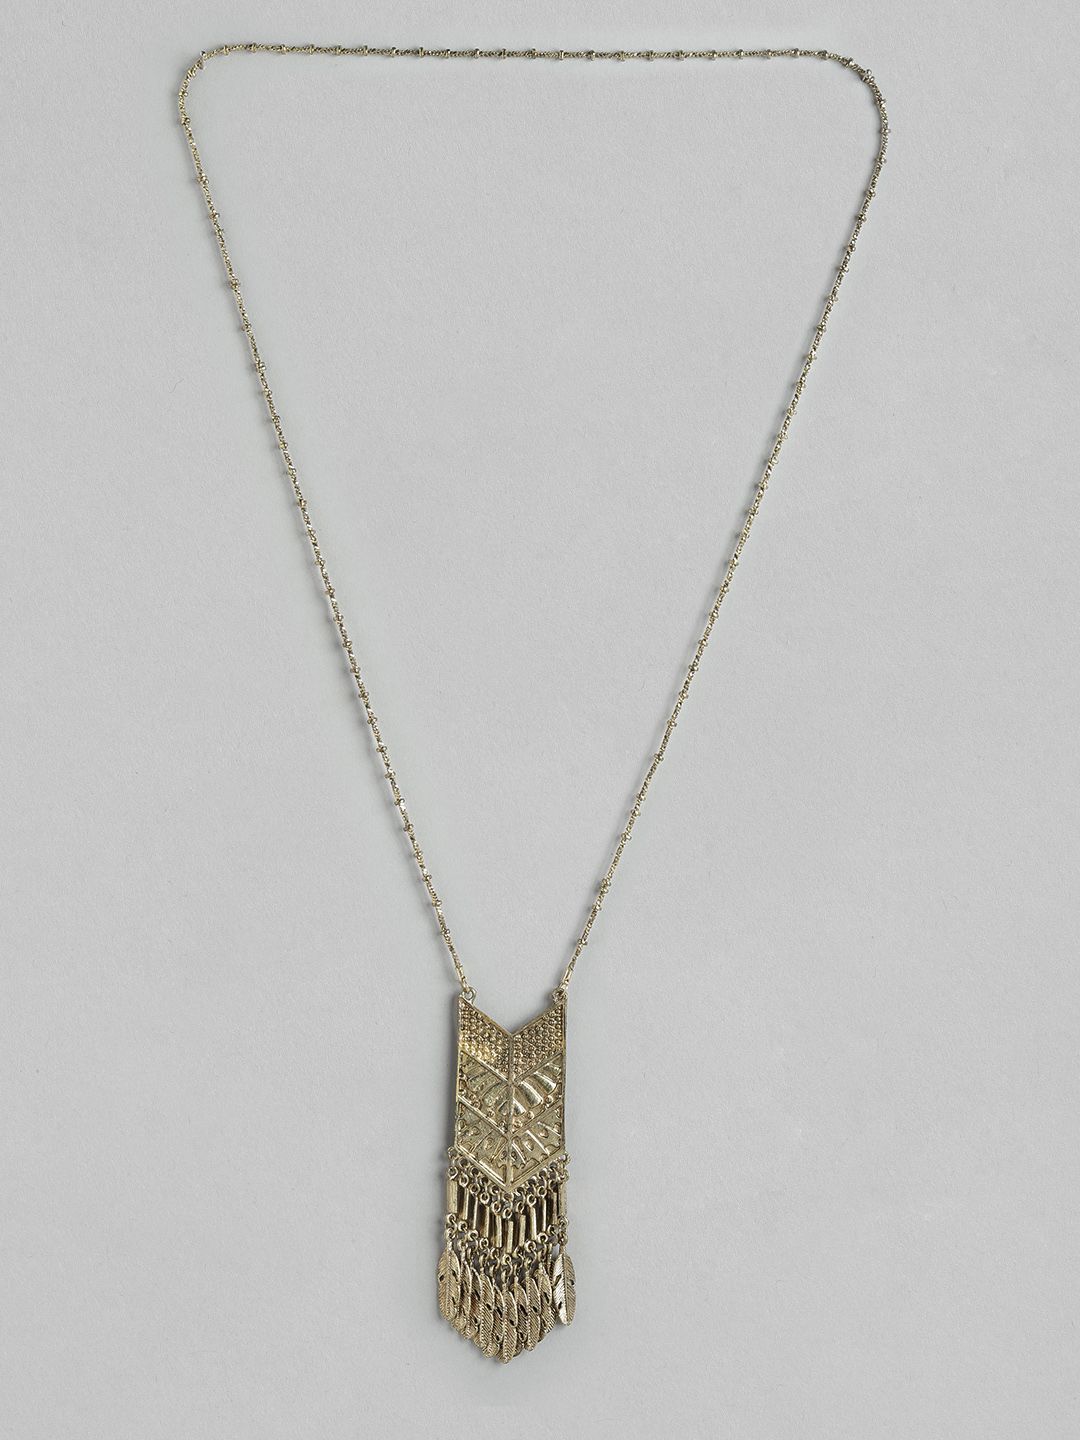 RICHEERA Gold-Toned Feather Necklace Price in India